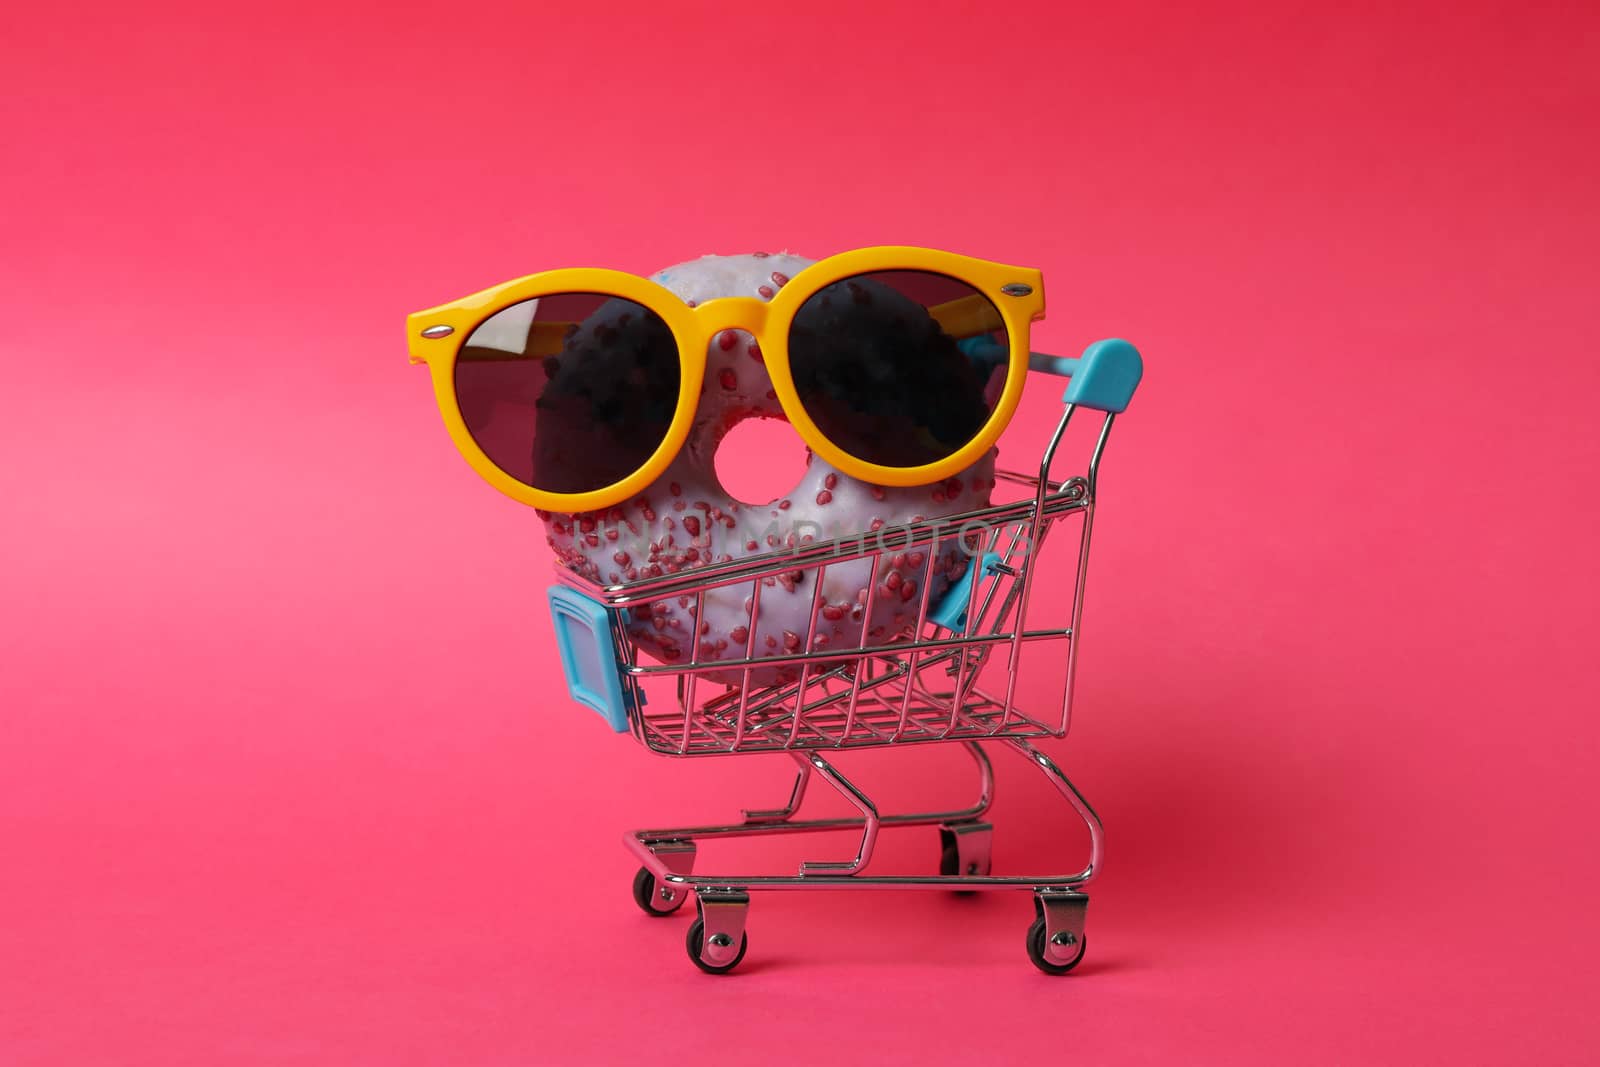 Shop trolley with sunglasses and donut on pink background